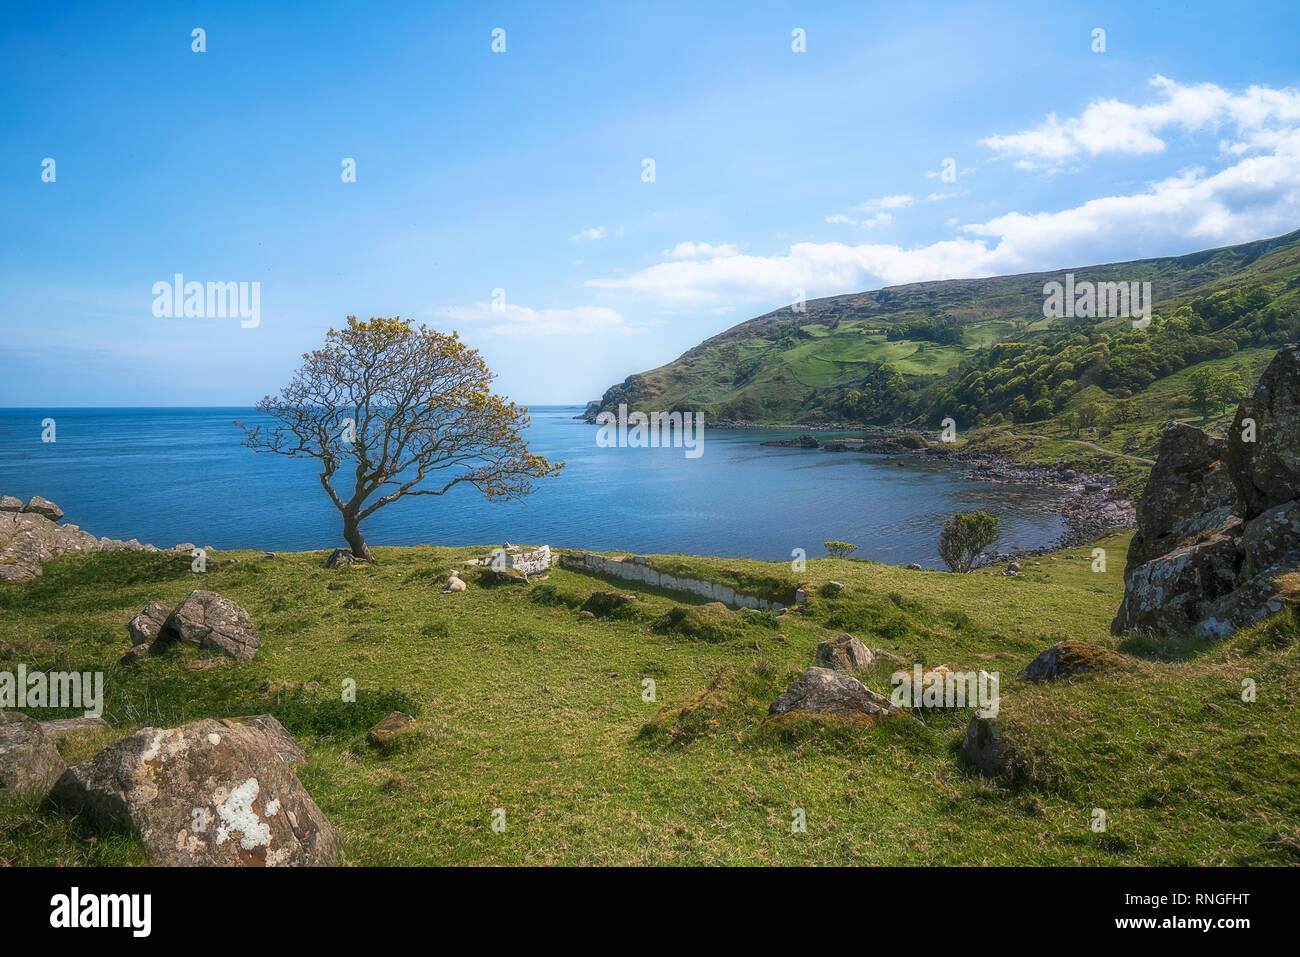 Little visited Murlough Bay is considered one of the most beautiful bays along the Antrim coast of Northern Ireland, with excellent views all around. Stock Photo